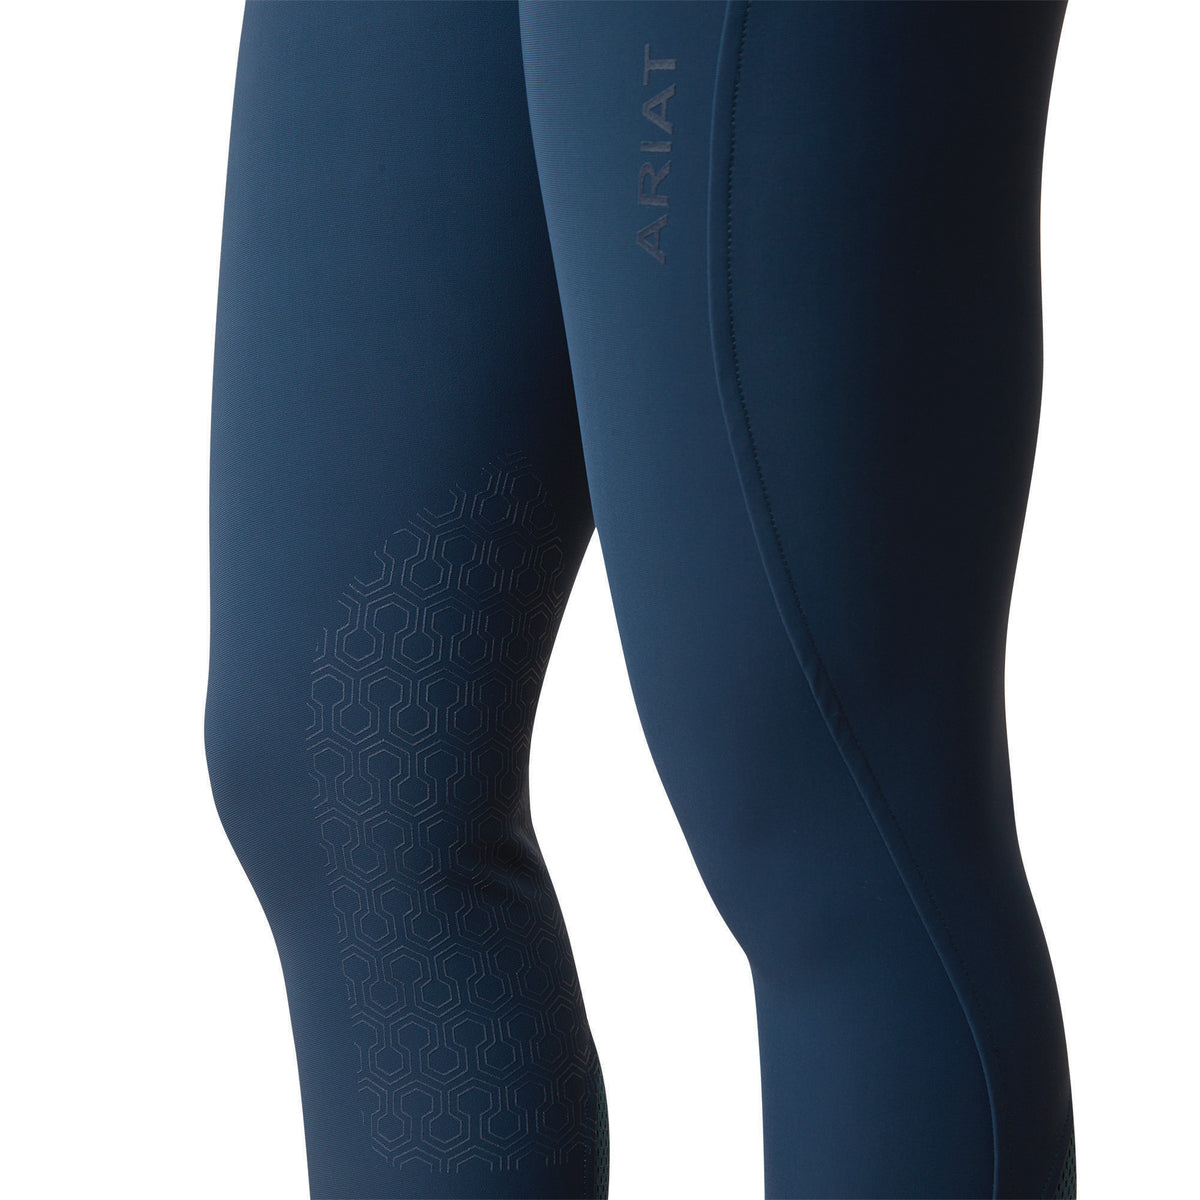 Ariat Europe - Tri Factor Frost Insulated - the must have breech for  winter!